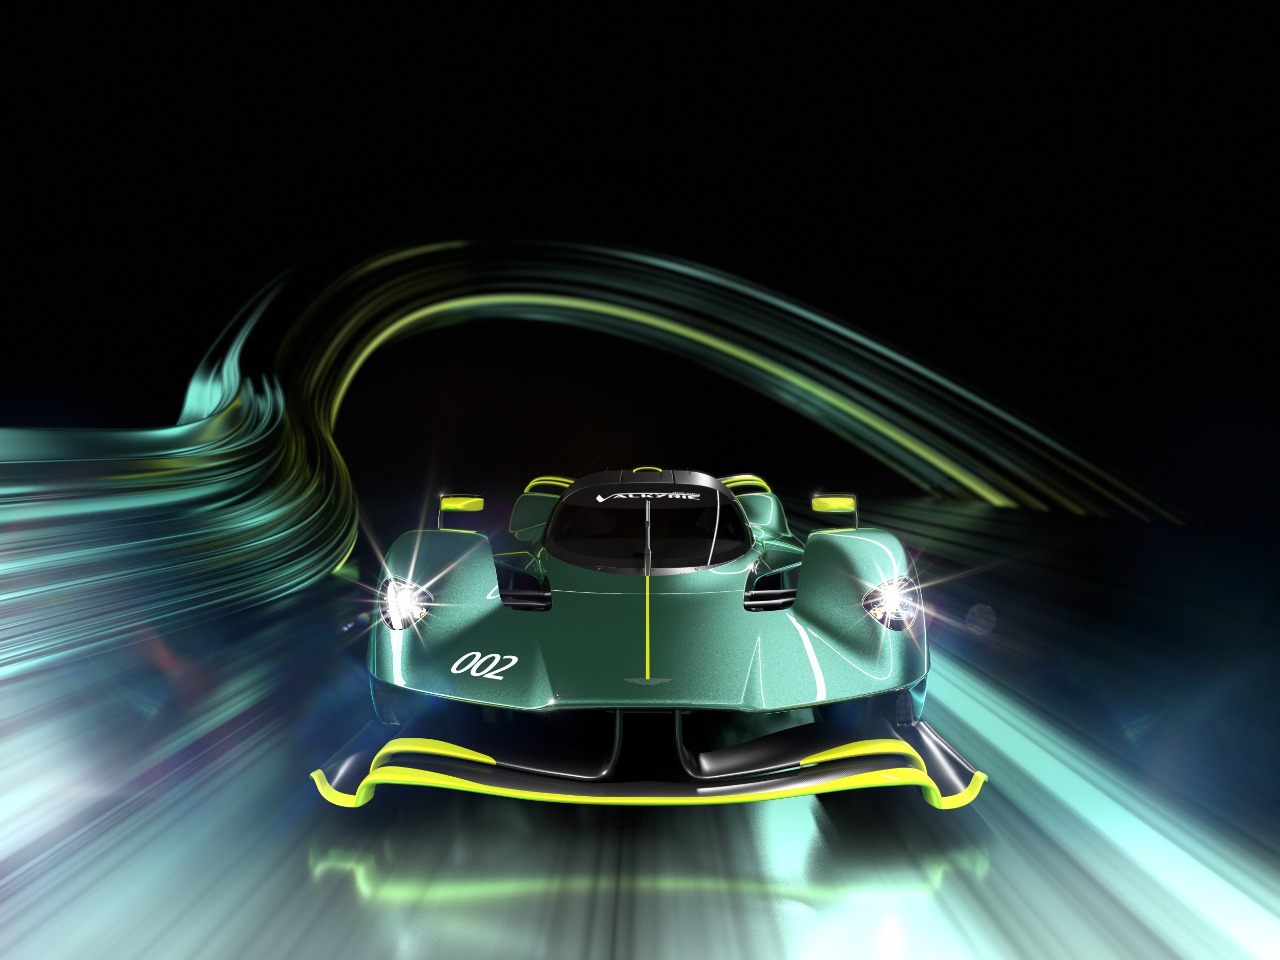 ASTON MARTIN VALKYRIE AMR PRO: THE ULTIMATE NO RULES HYPERCAR